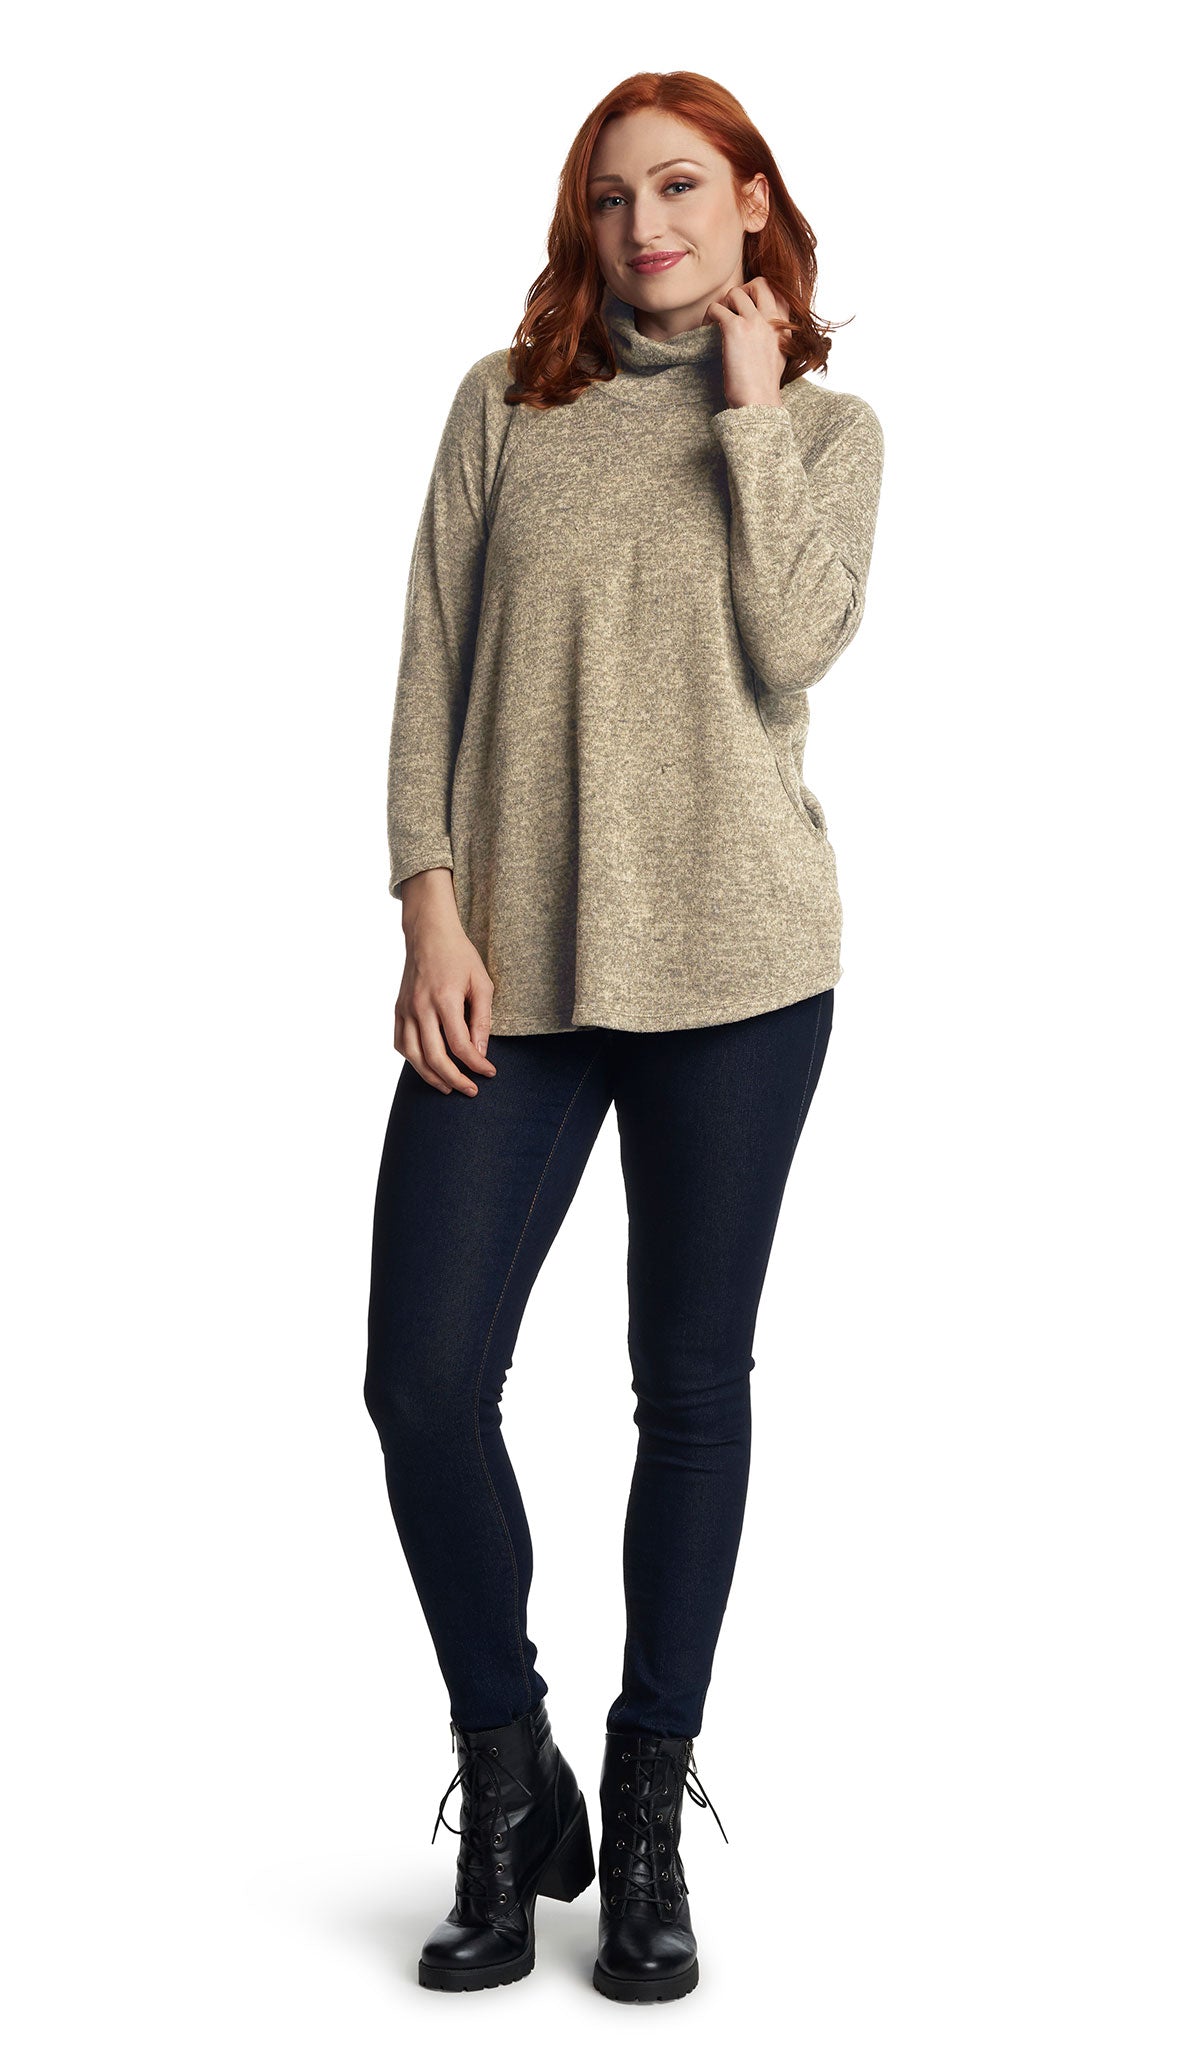 Mocha Teresa Sweater. Full length shot of pregnant woman wearing Teresa Sweater and dark denim jeans and booties with one hand touching collar.